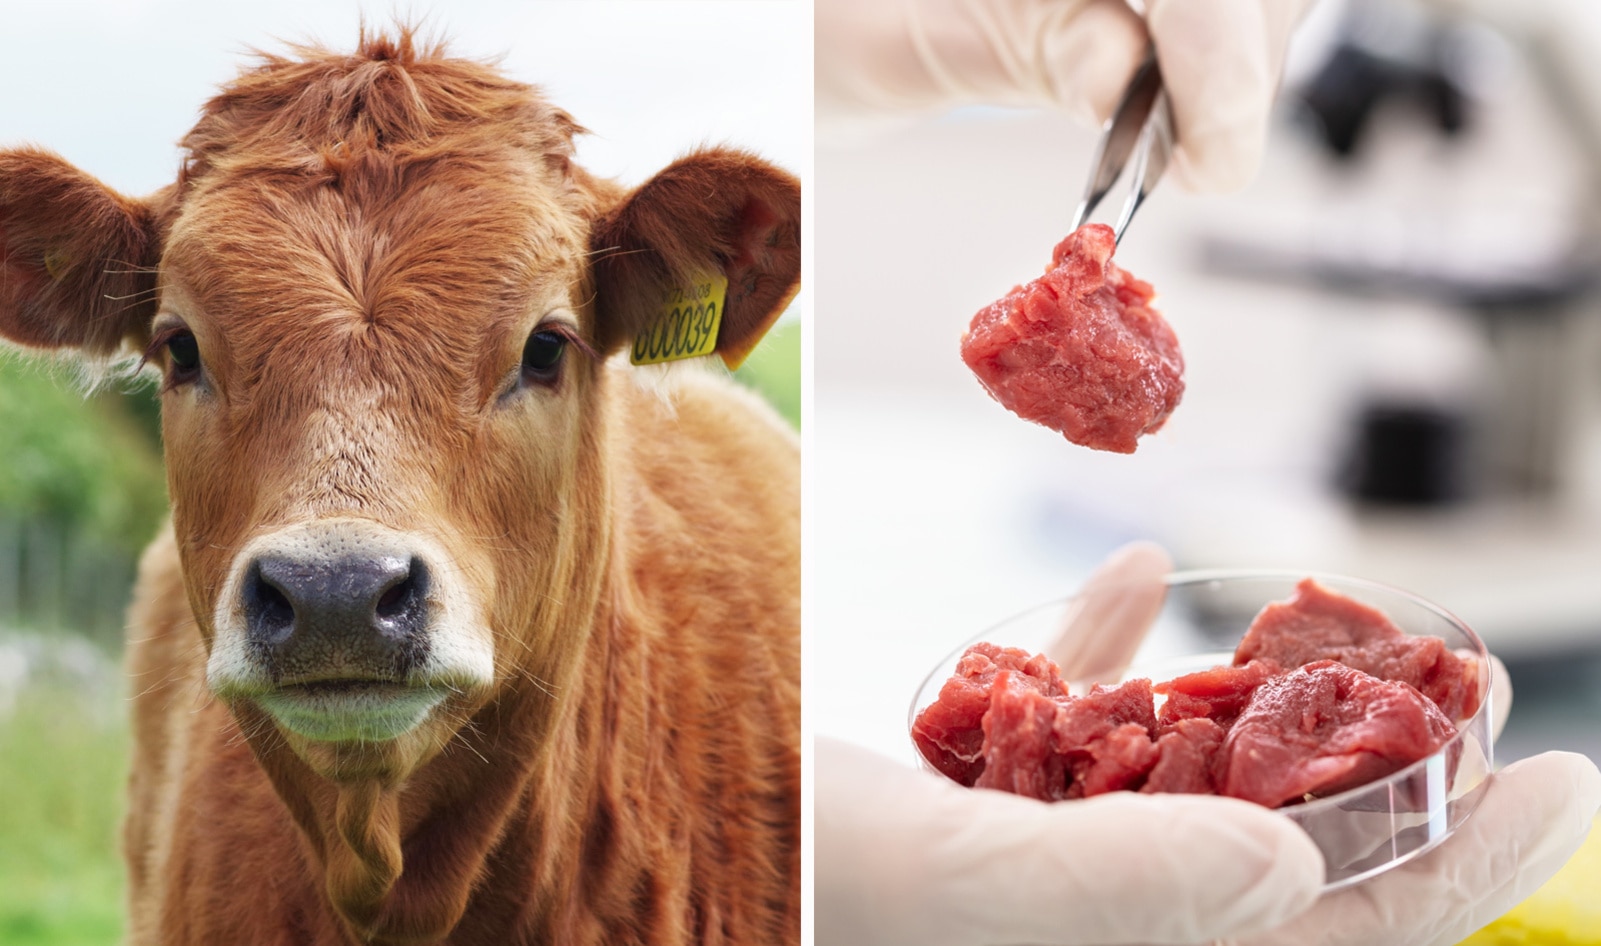 Nestlé Is First Major Food Company to Get Behind Lab-Grown Meat. Is That a Good Thing?